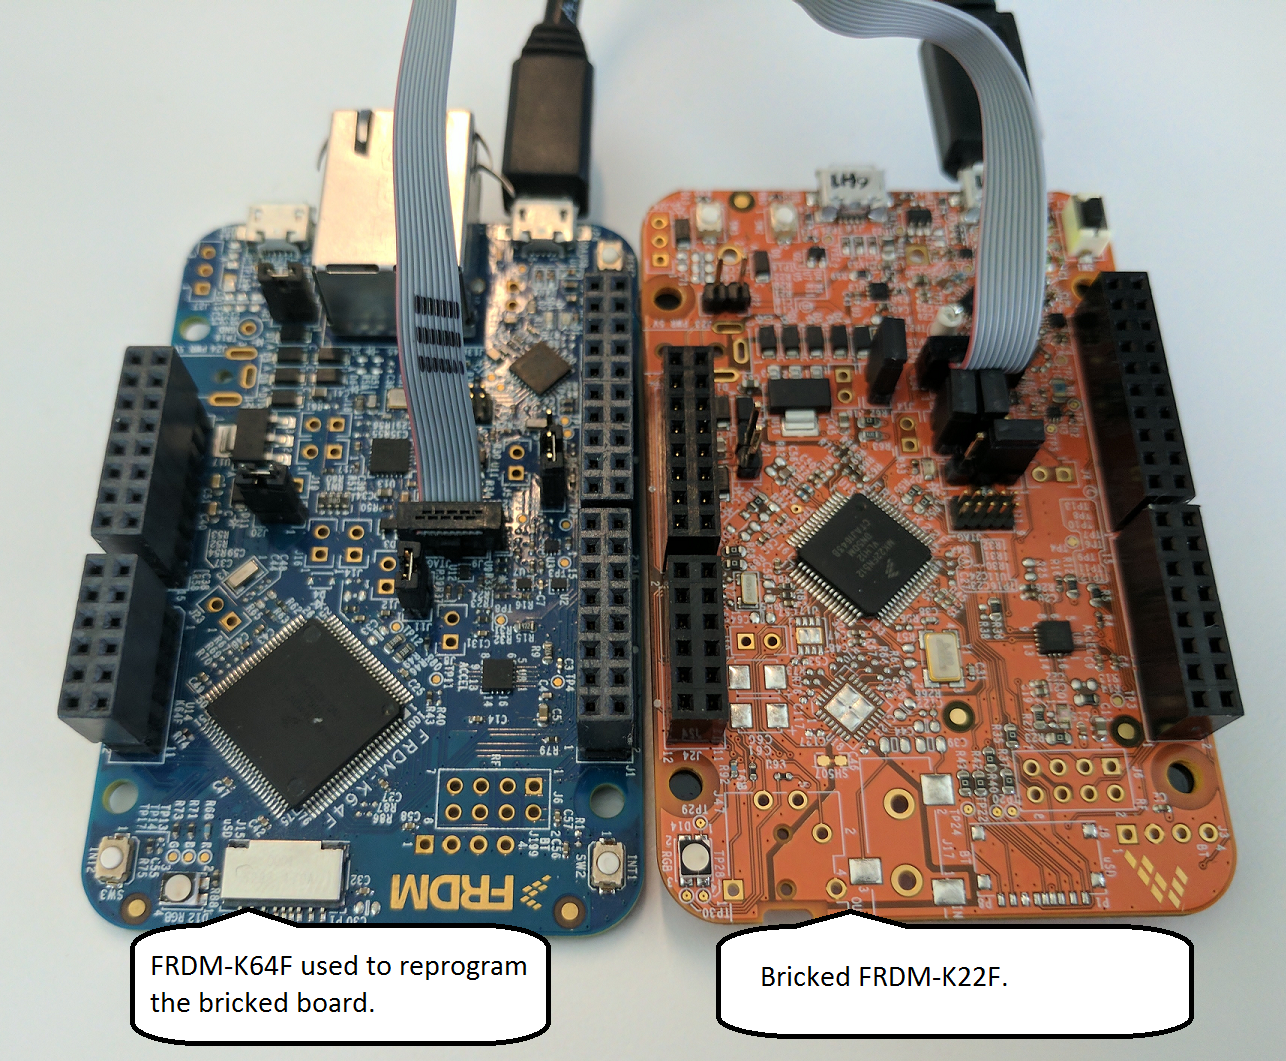 Using a FRDM-K64F as a debug probe to restore the bootloader on a FRDM-K22F.